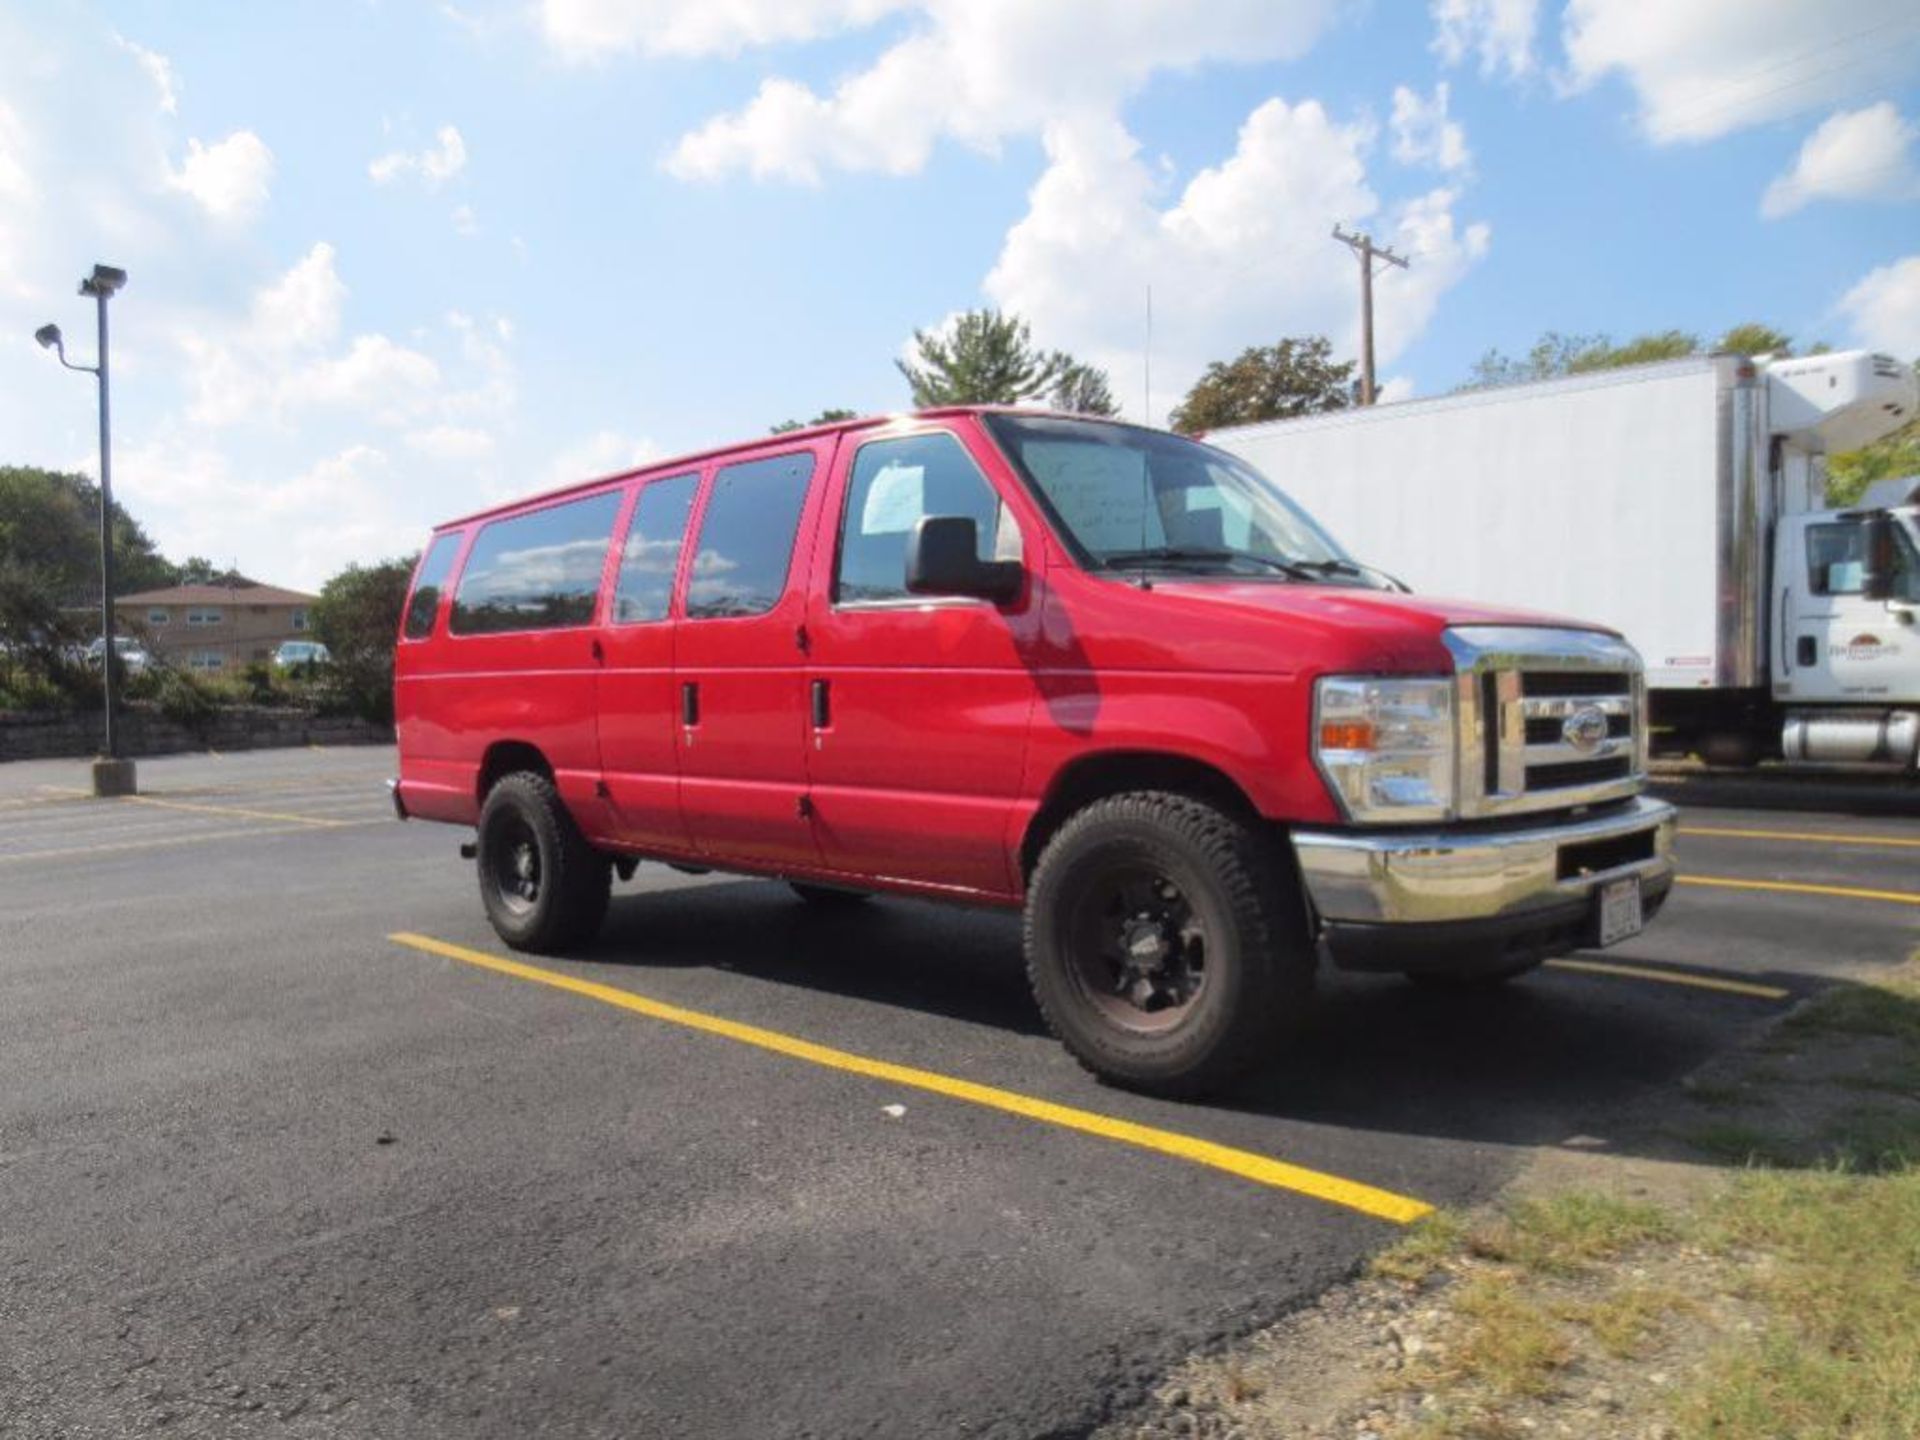 2012 Ford E-350 Extended Cargo Van RWD, 6.8 Liter V-10 Engine, Automatic Transmission, 78,272 Miles